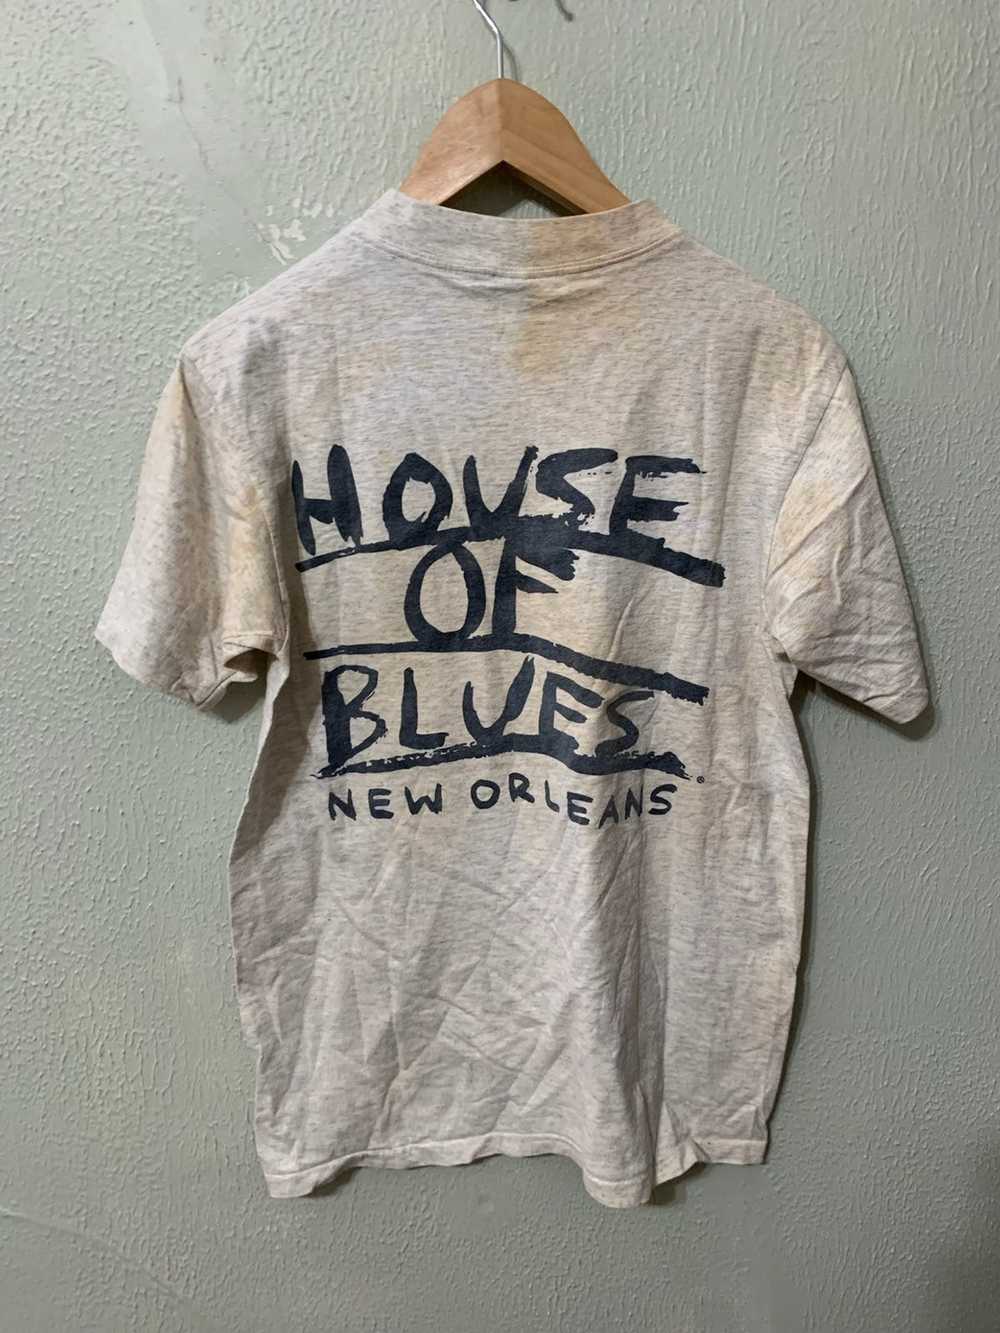 Vintage Vintage House of Blues Grey Stained Tee - image 3